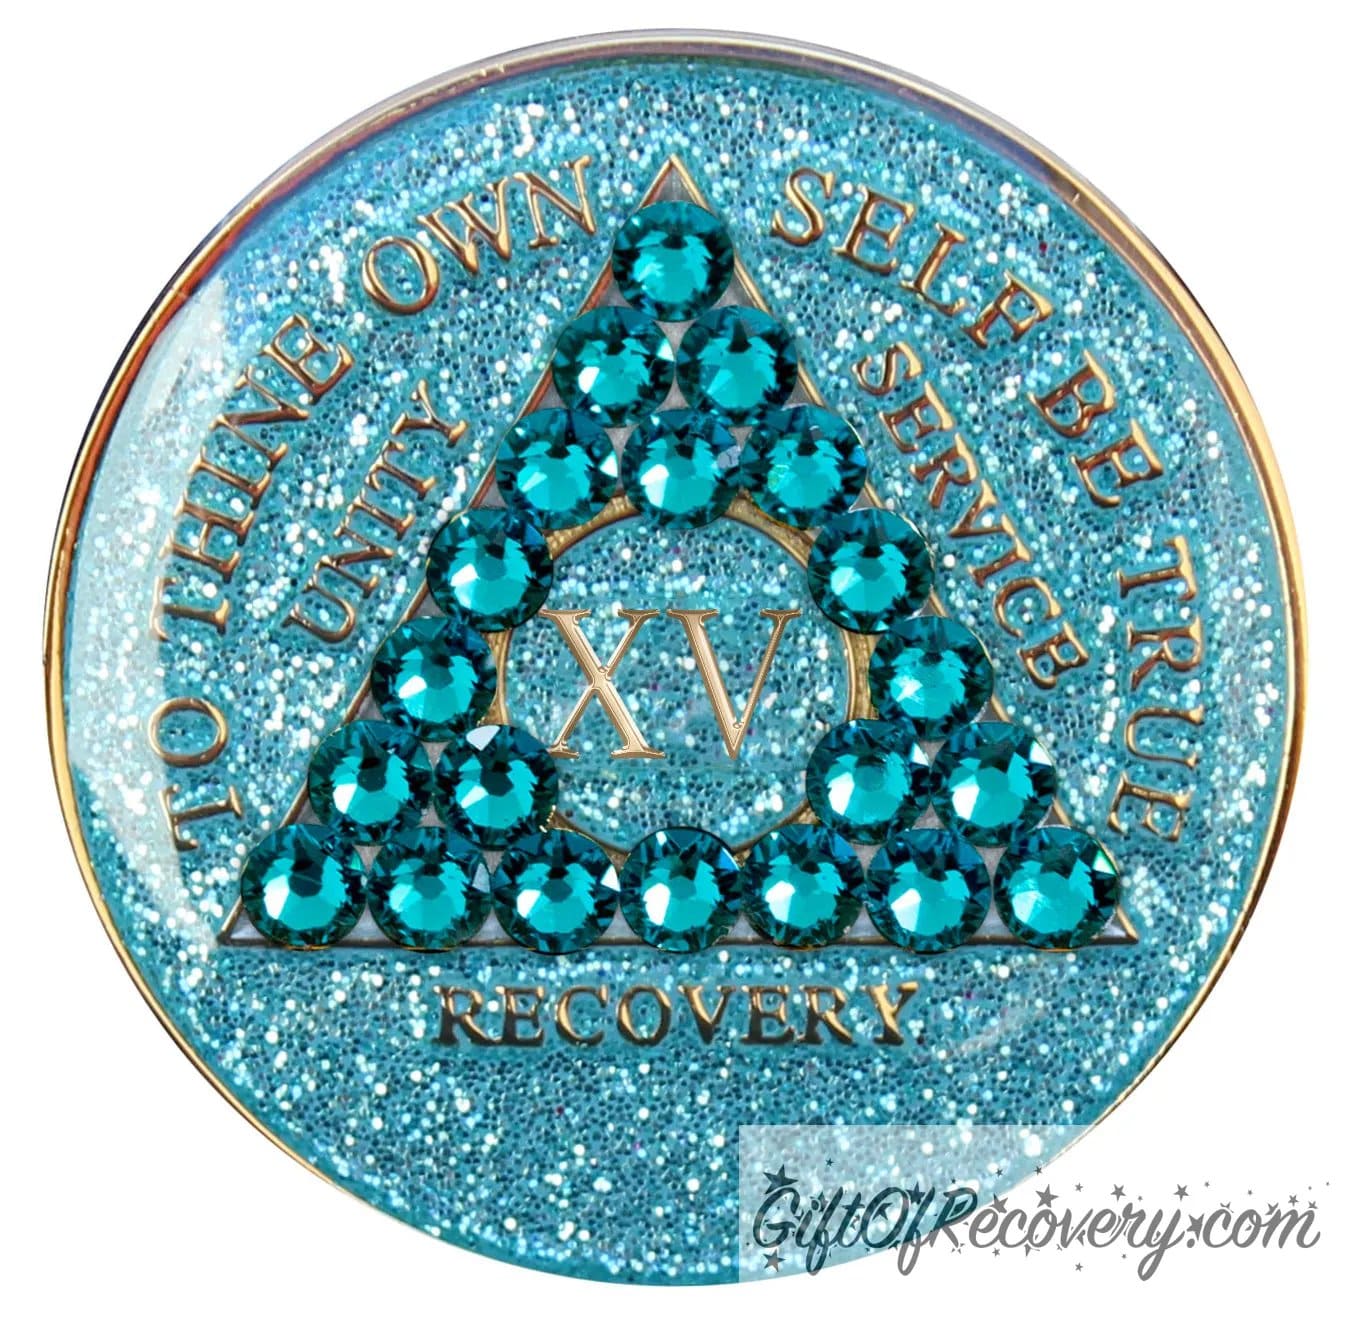 15 year AA medallion in aqua glitter with to thine own self be true, unity, service, recovery, the roman numeral in the center, and the outer rim of the medallion embossed in 14k gold plated brass, the center triangle has 21 genuine blue zircon crystal to give it a sparkle, it is sealed with resin for a shiny finish.